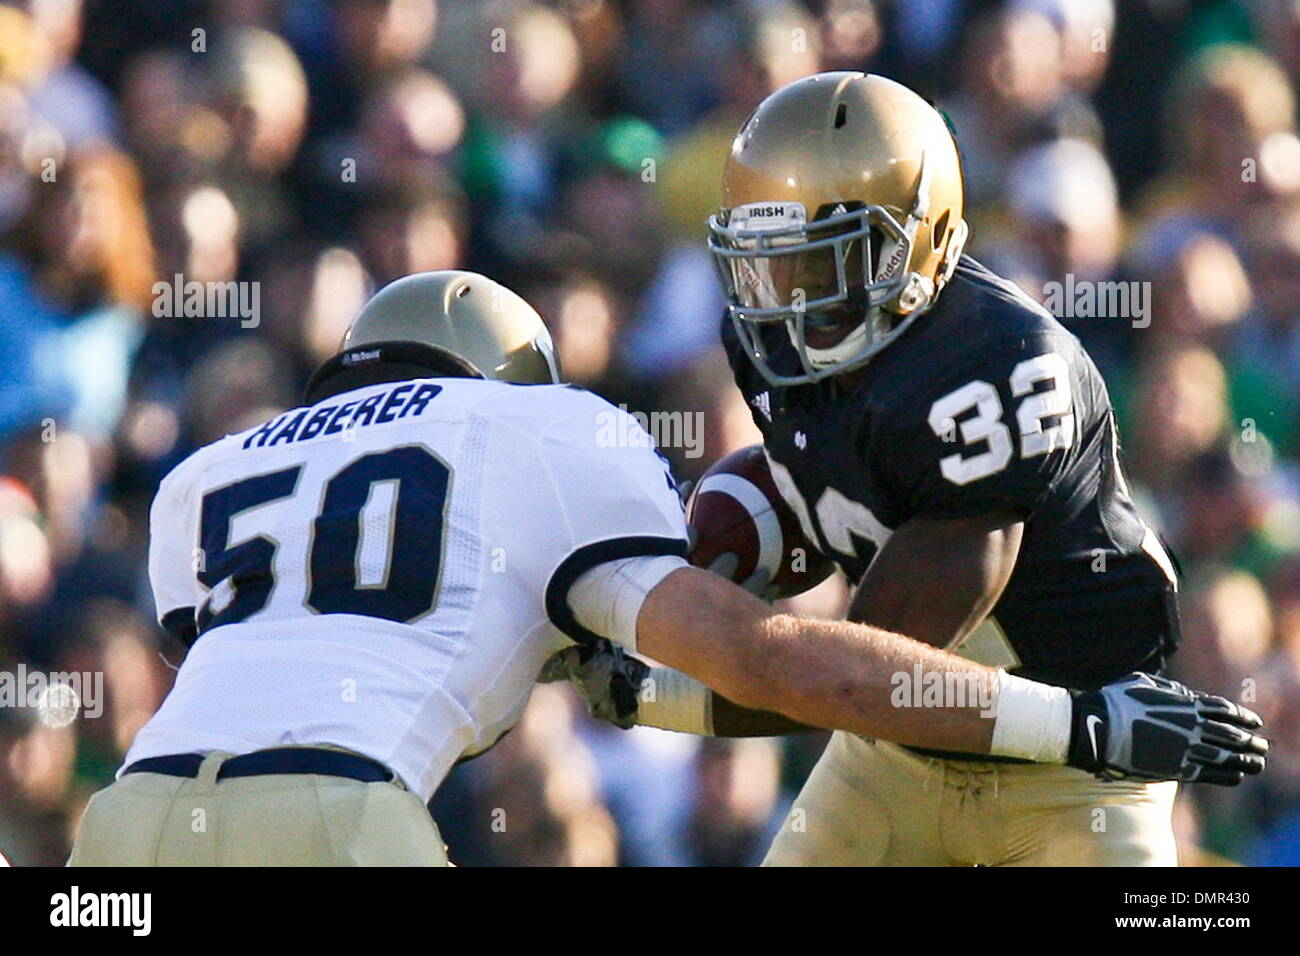 Notre Dame wide receiver Theo Riddick (32) takes a hit from Navy linebacker Tony Haberer (50) during game action.  Navy at Notre Dame at Notre Dame Stadium in South Bend, Indiana.  Navy defeated Notre Dame 23-21. (Credit Image: © Scott Grau/Southcreek Global/ZUMApress.com) Stock Photo